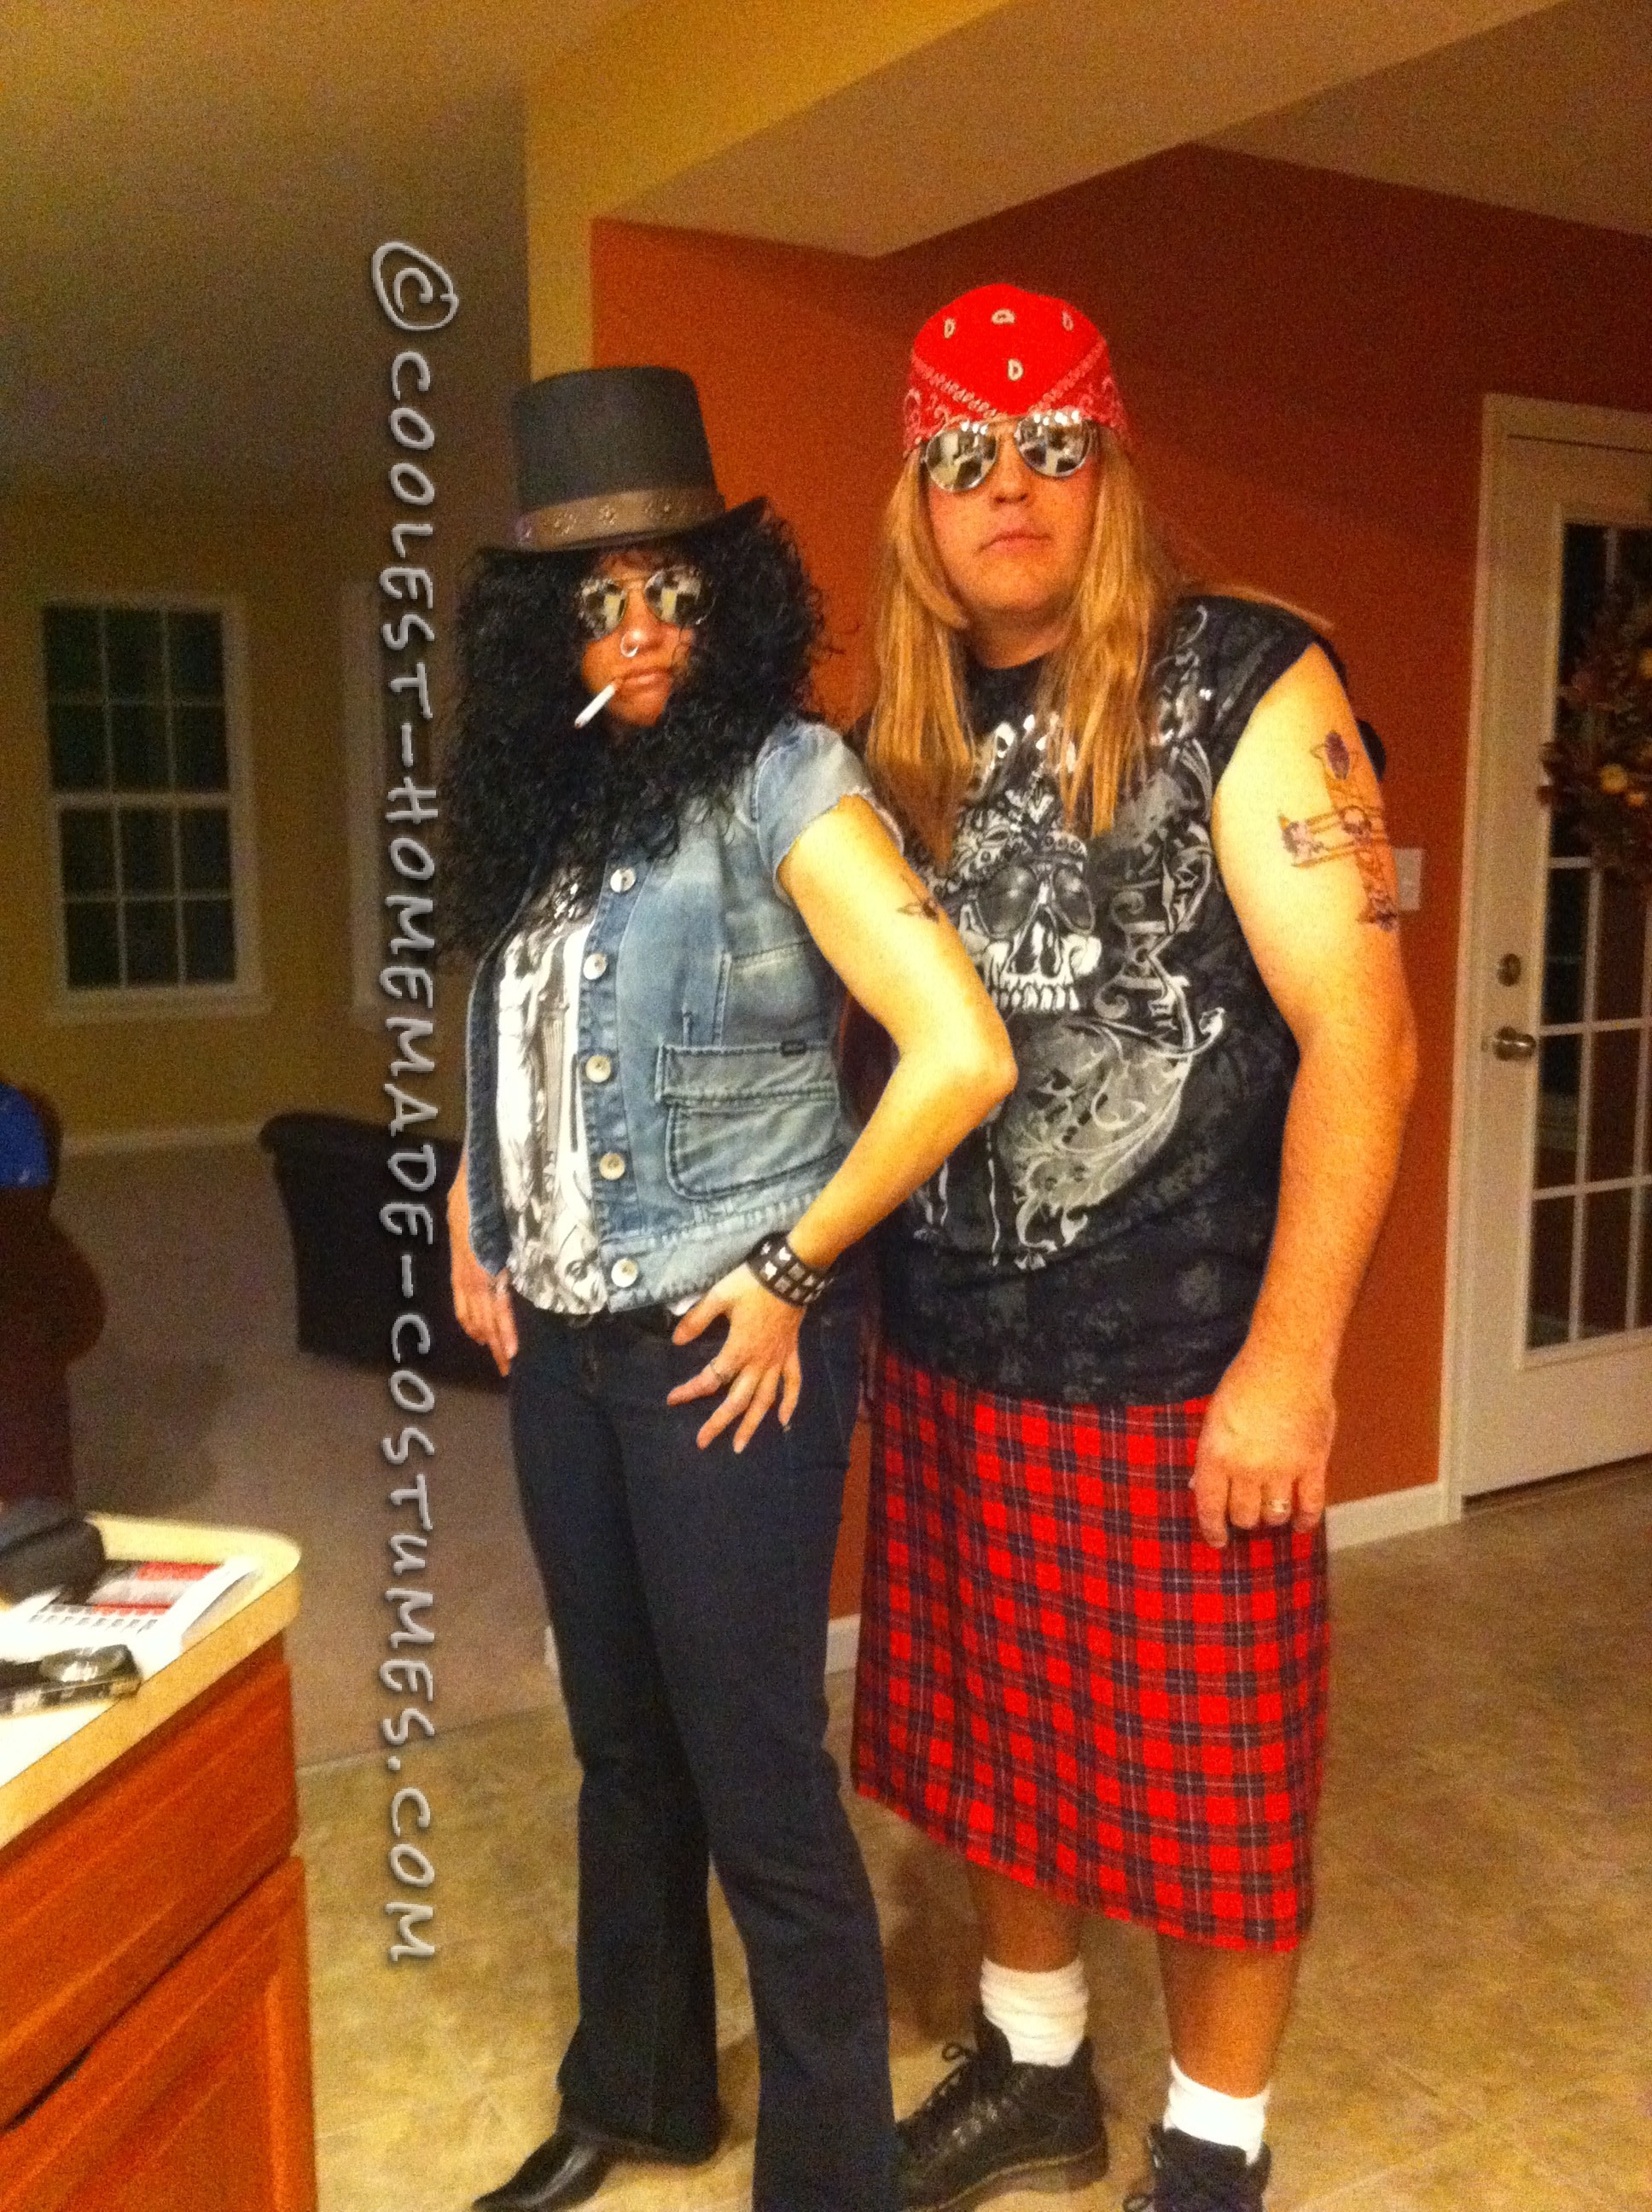 Rock Star Legends for One Night: Axl and Slash Couple Halloween Costume